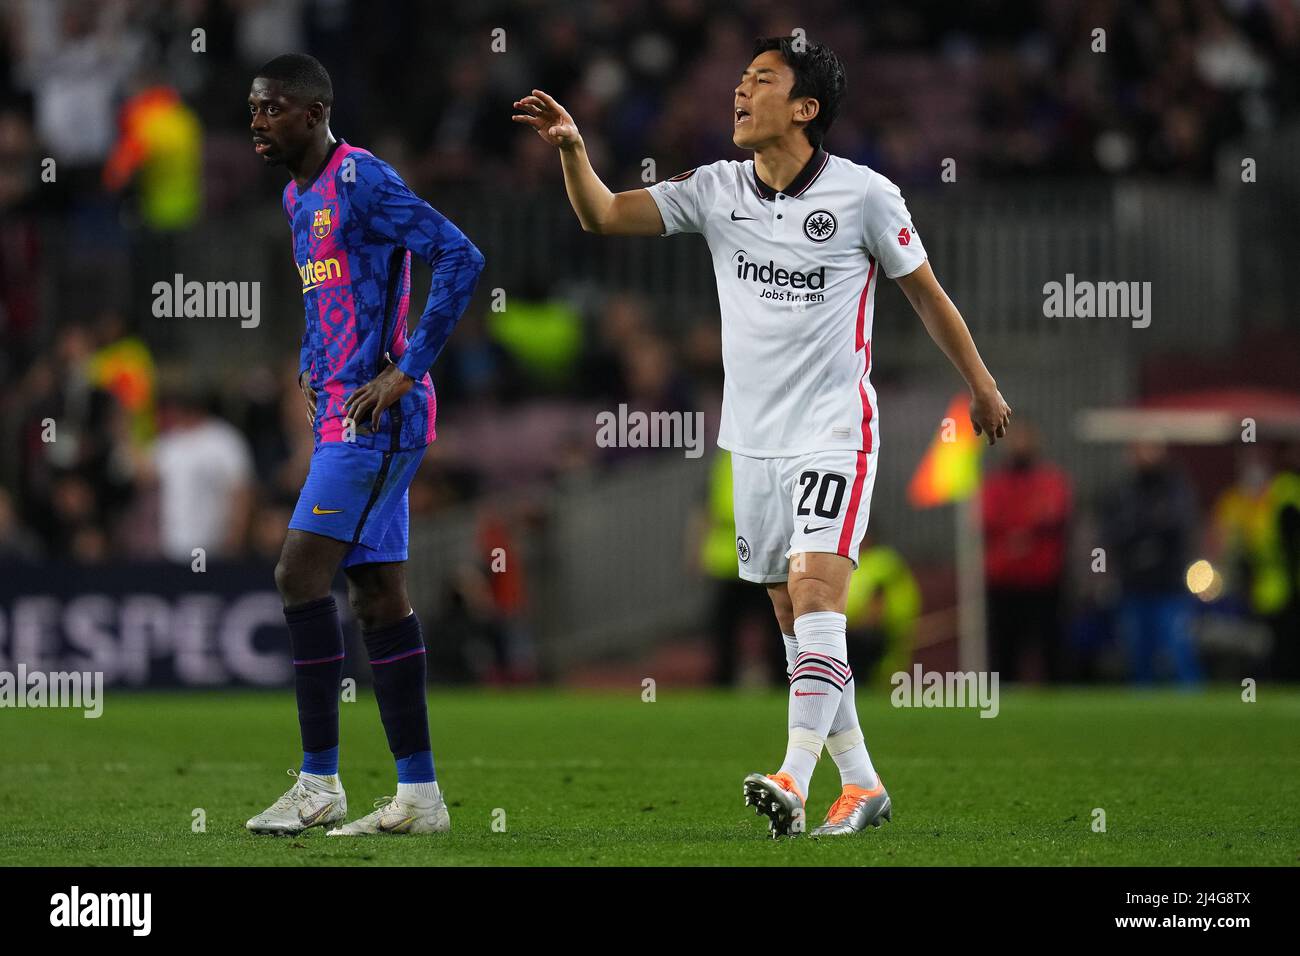 Makoto Hasebe of Eintracht Frankfurt during the UEFA Europa League match, Quarter Final, Second Leg, between FC Barcelona and Eintracht Frankfurt played at Camp Nou Stadium on April 14, 2022 in Barcelona, Spain. (Photo by Colas Buera / PRESSINPHOTO) Stock Photo